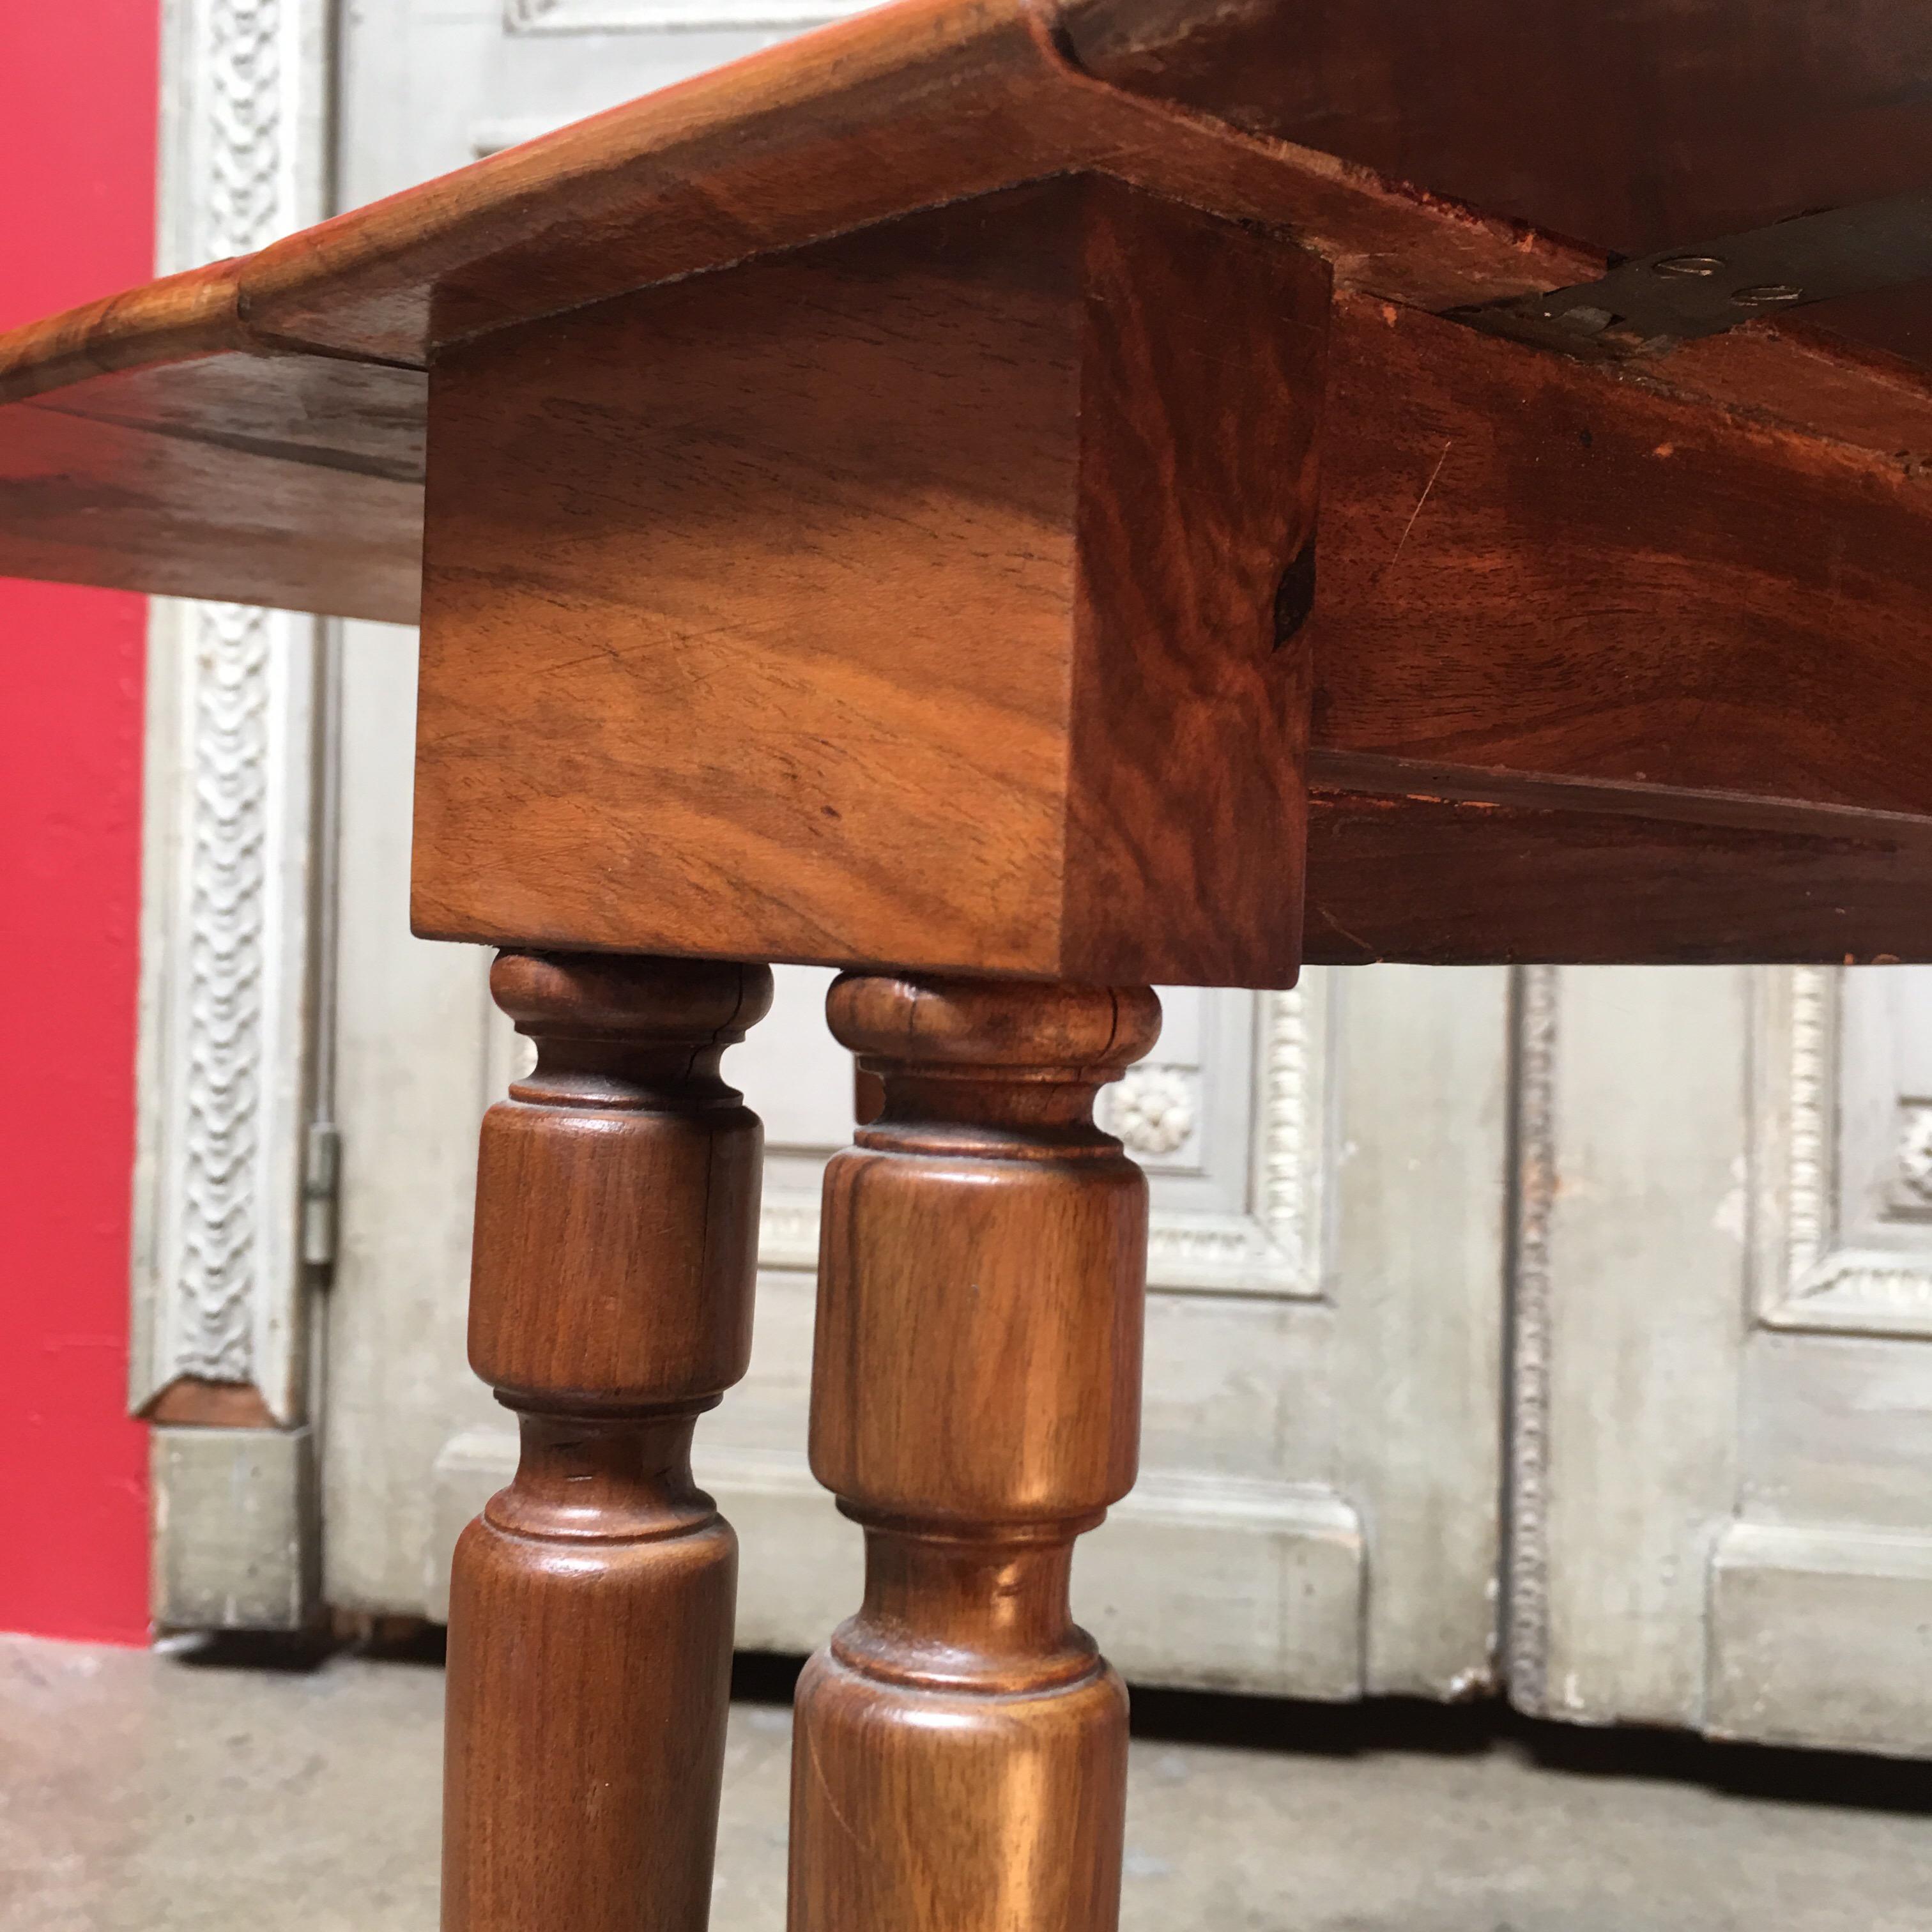 19th Century English Sutherland Drop-Leaf Table in Walnut and Kingwood Veneer For Sale 8